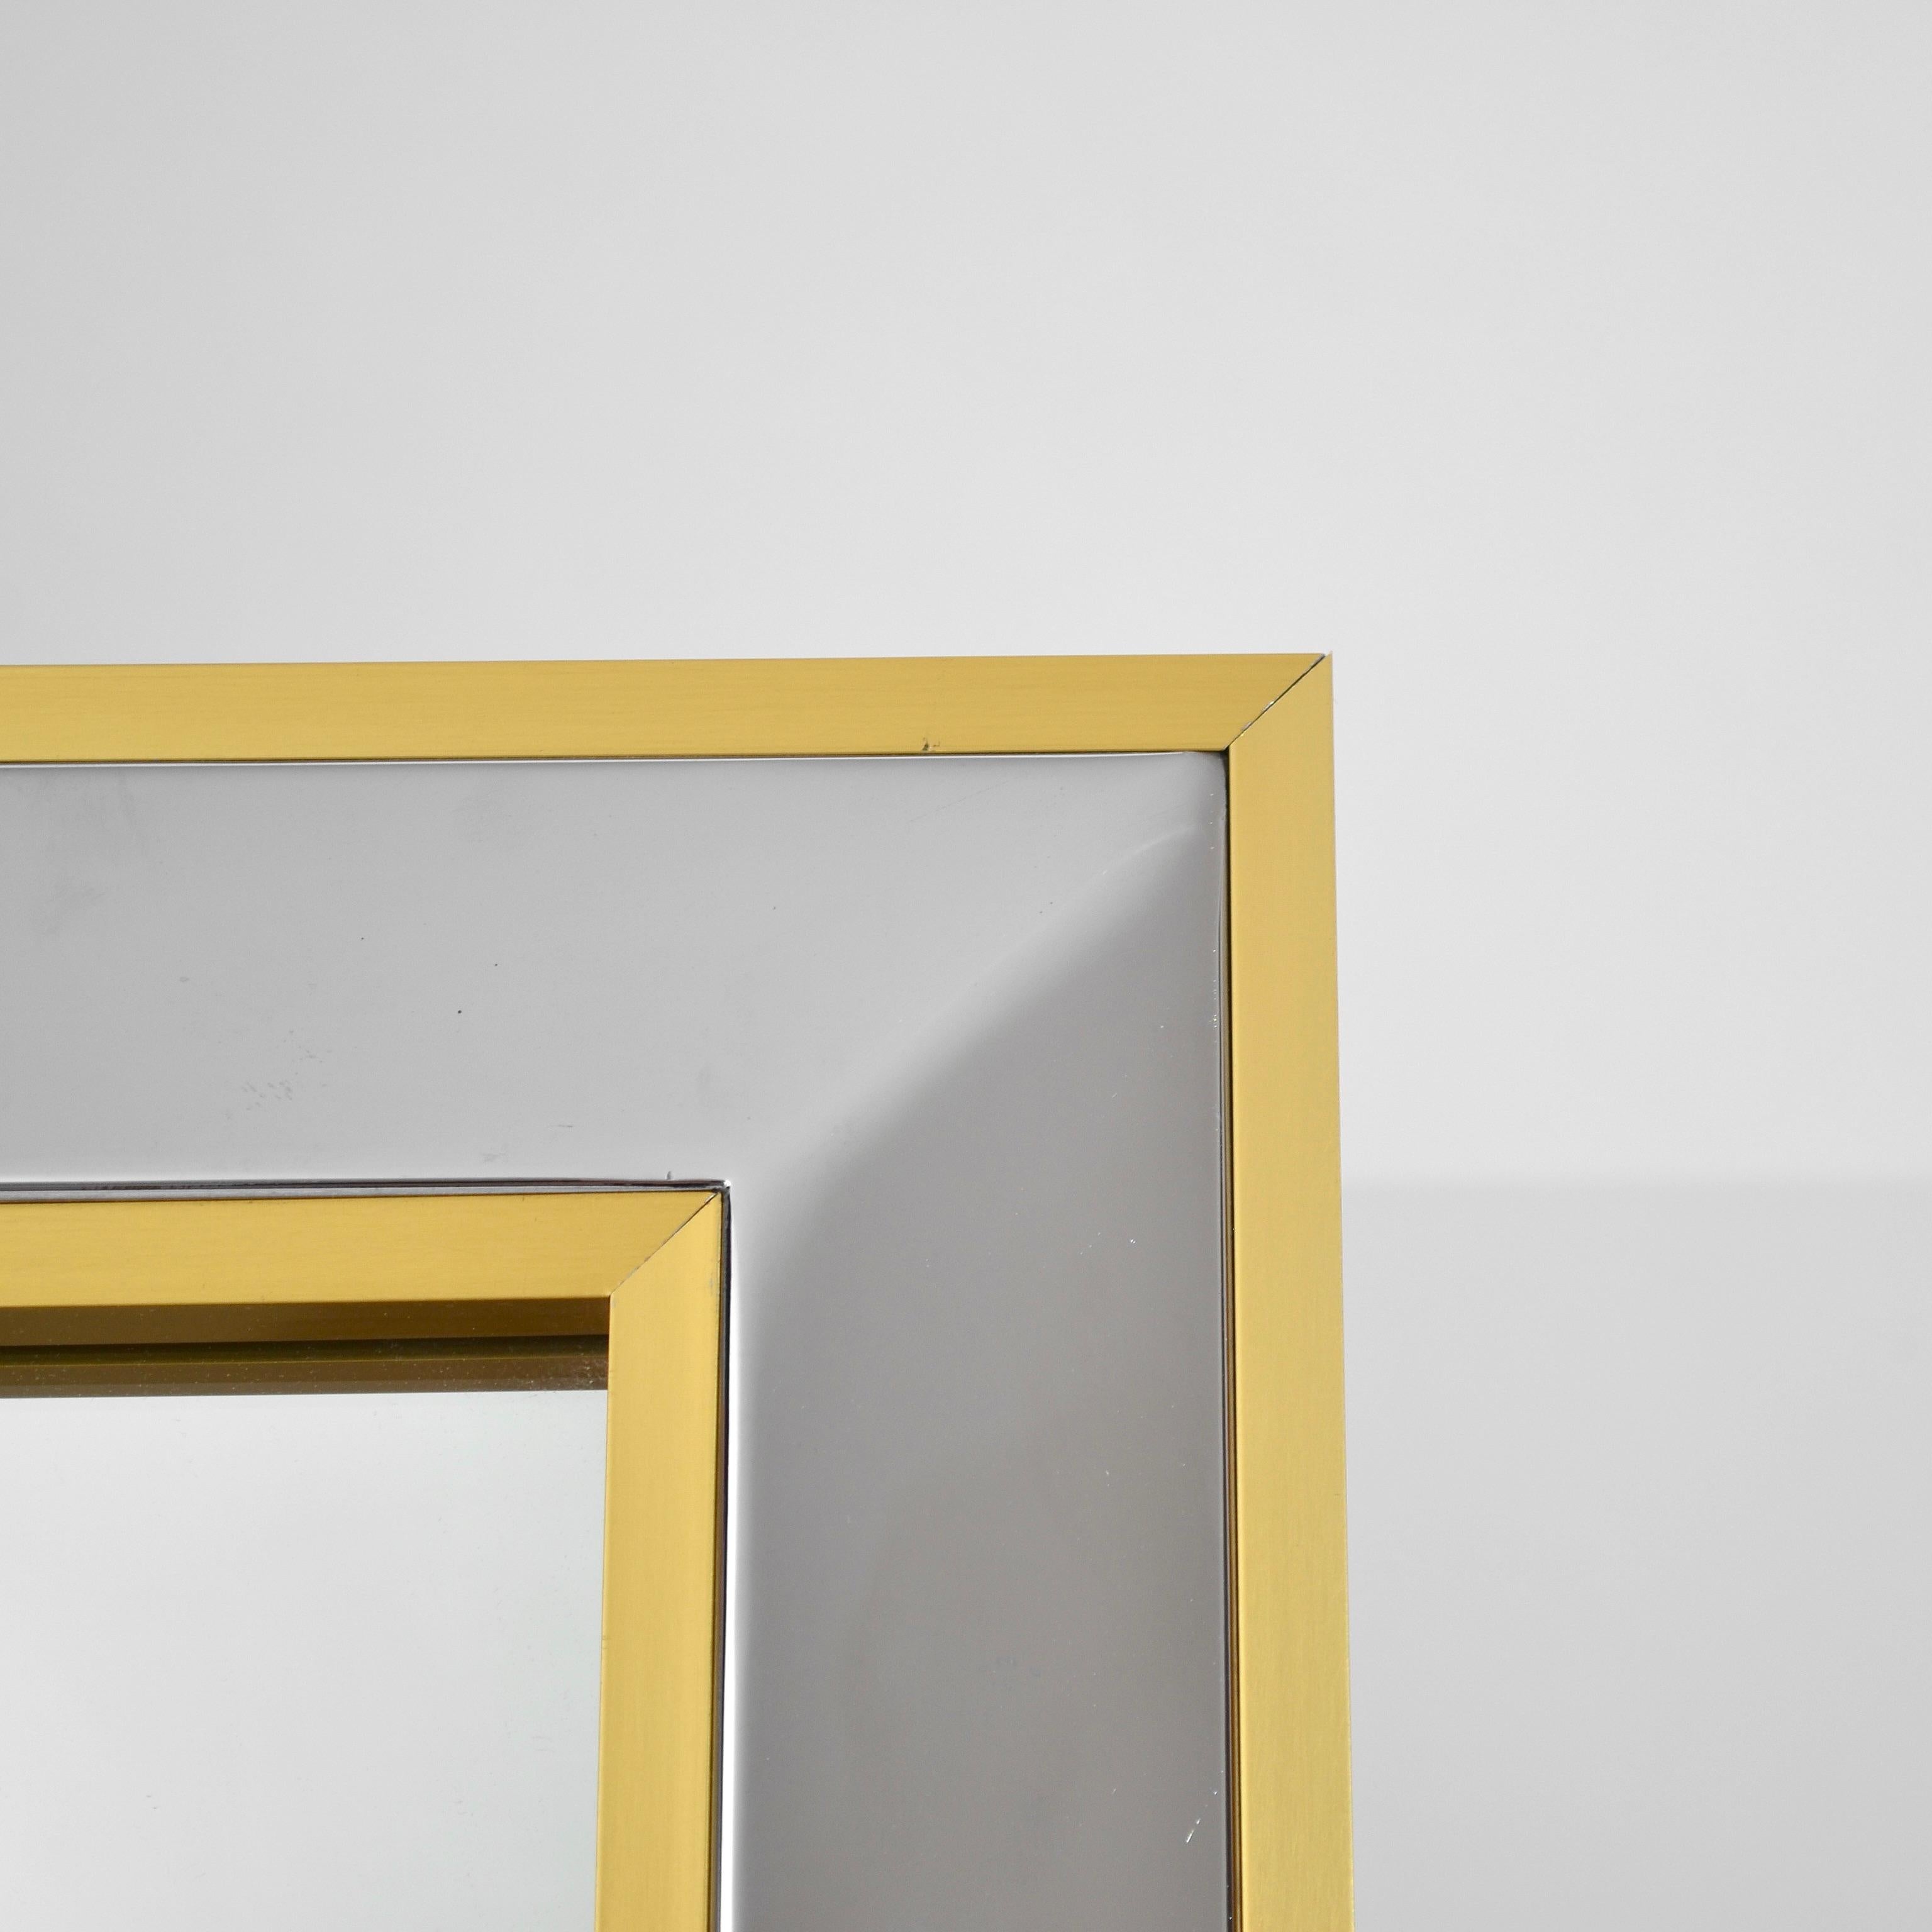 As if the simple reflection of a mirror was not enough, these are entirely framed in chrome and brass to shine with a thousand and one sparkles!

Glamorous and daring, these large Italian mirrors from the 70s will bring that 